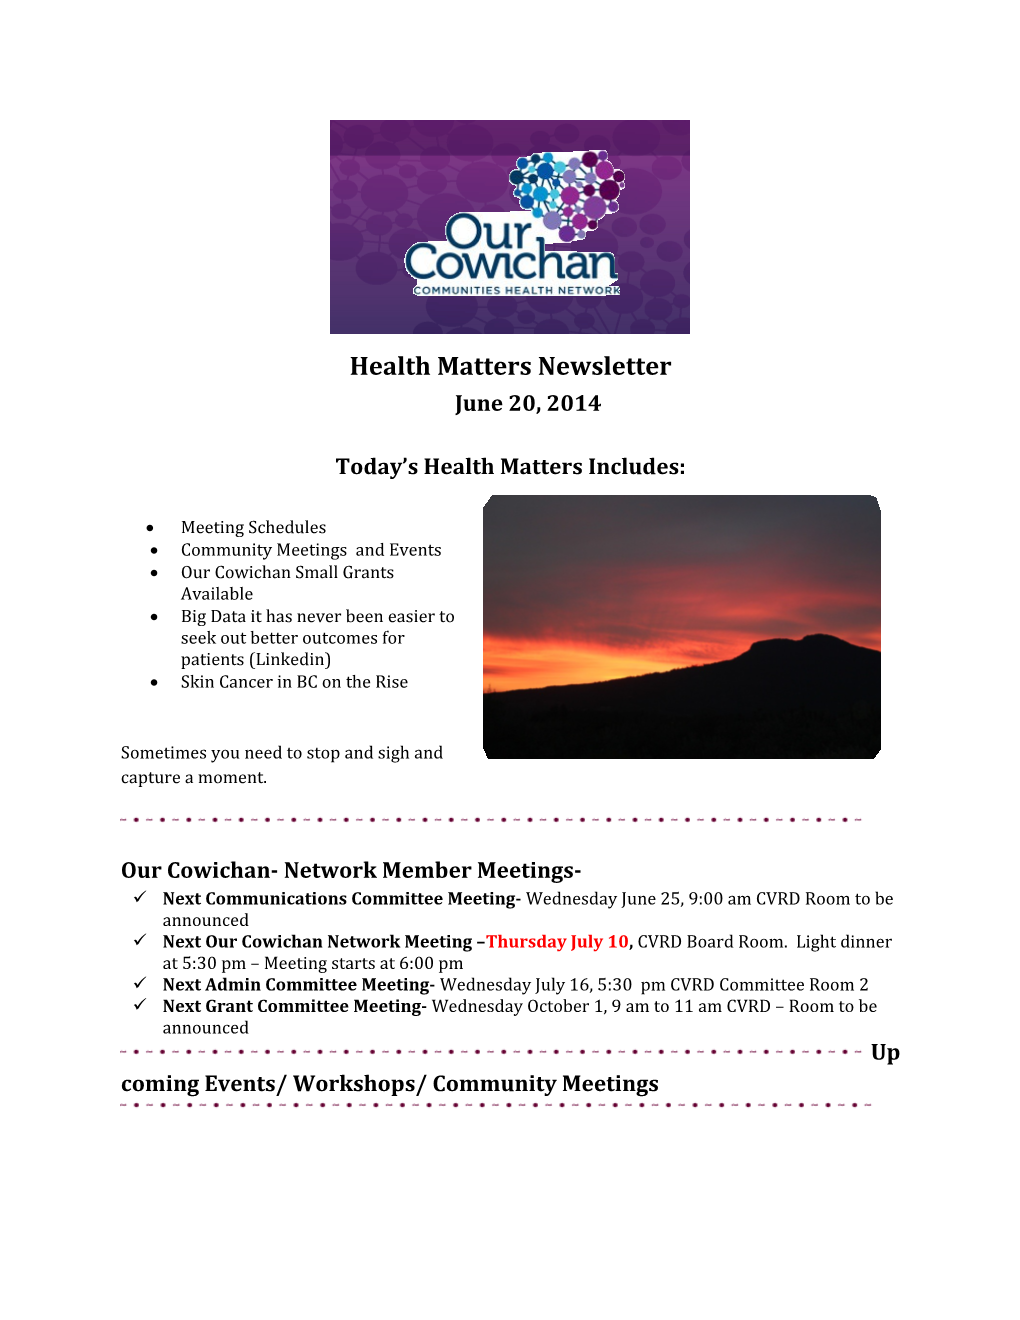 Today S Health Matters Includes